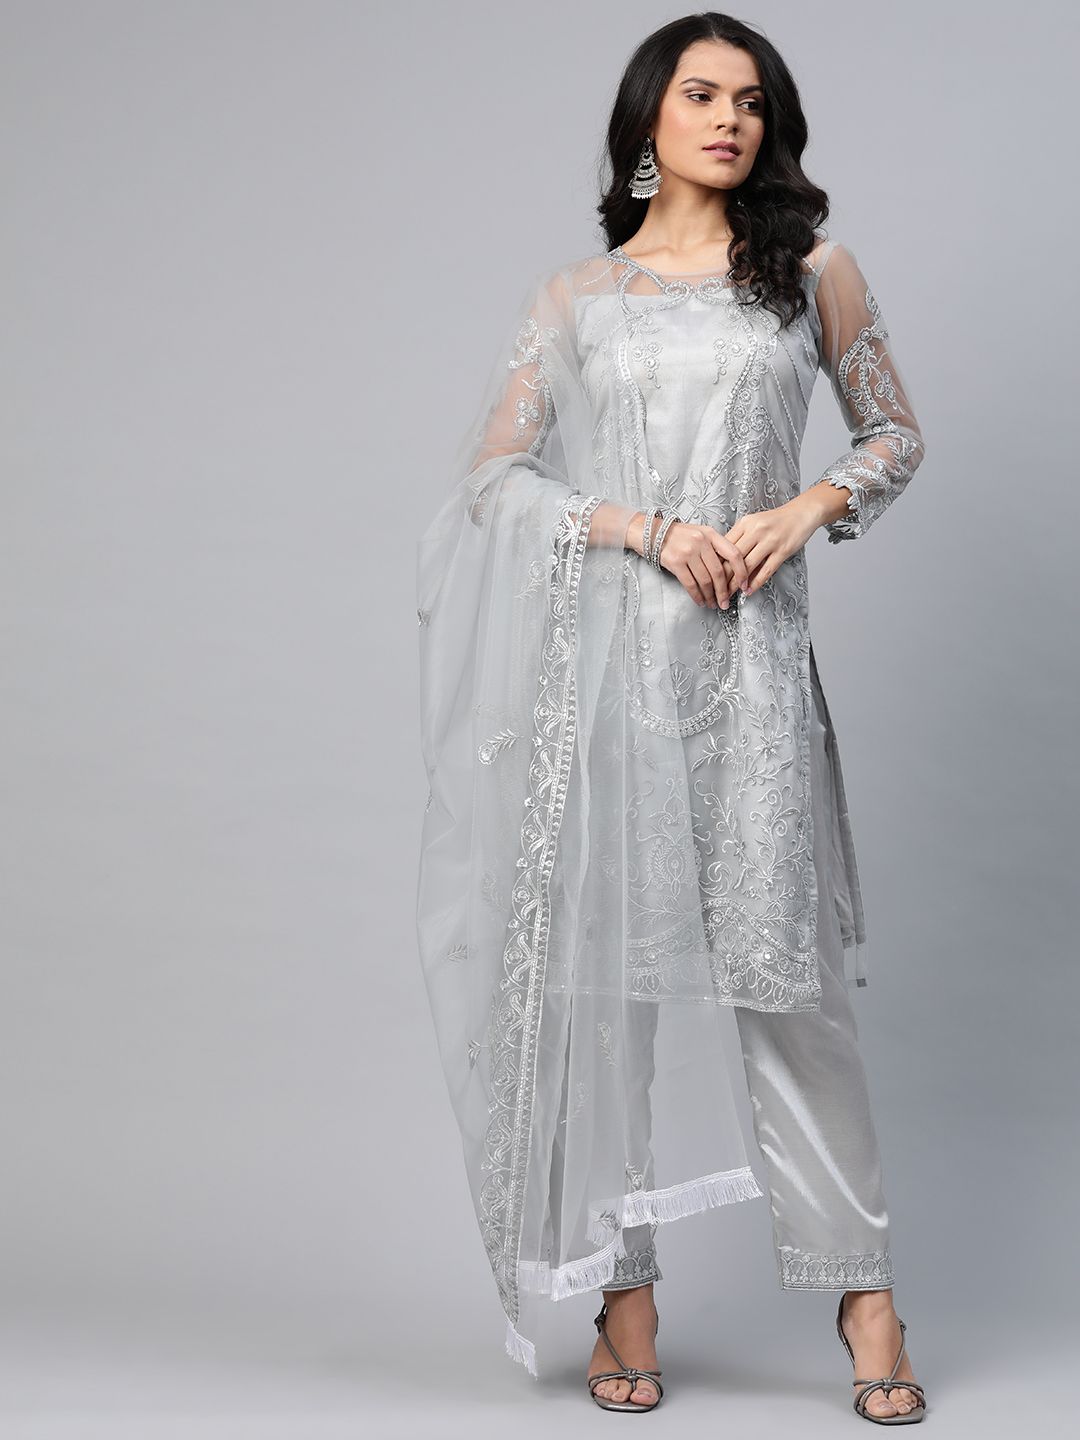 Readiprint Fashions Grey & Silver Embroidered Semi-Stitched Dress Material Price in India